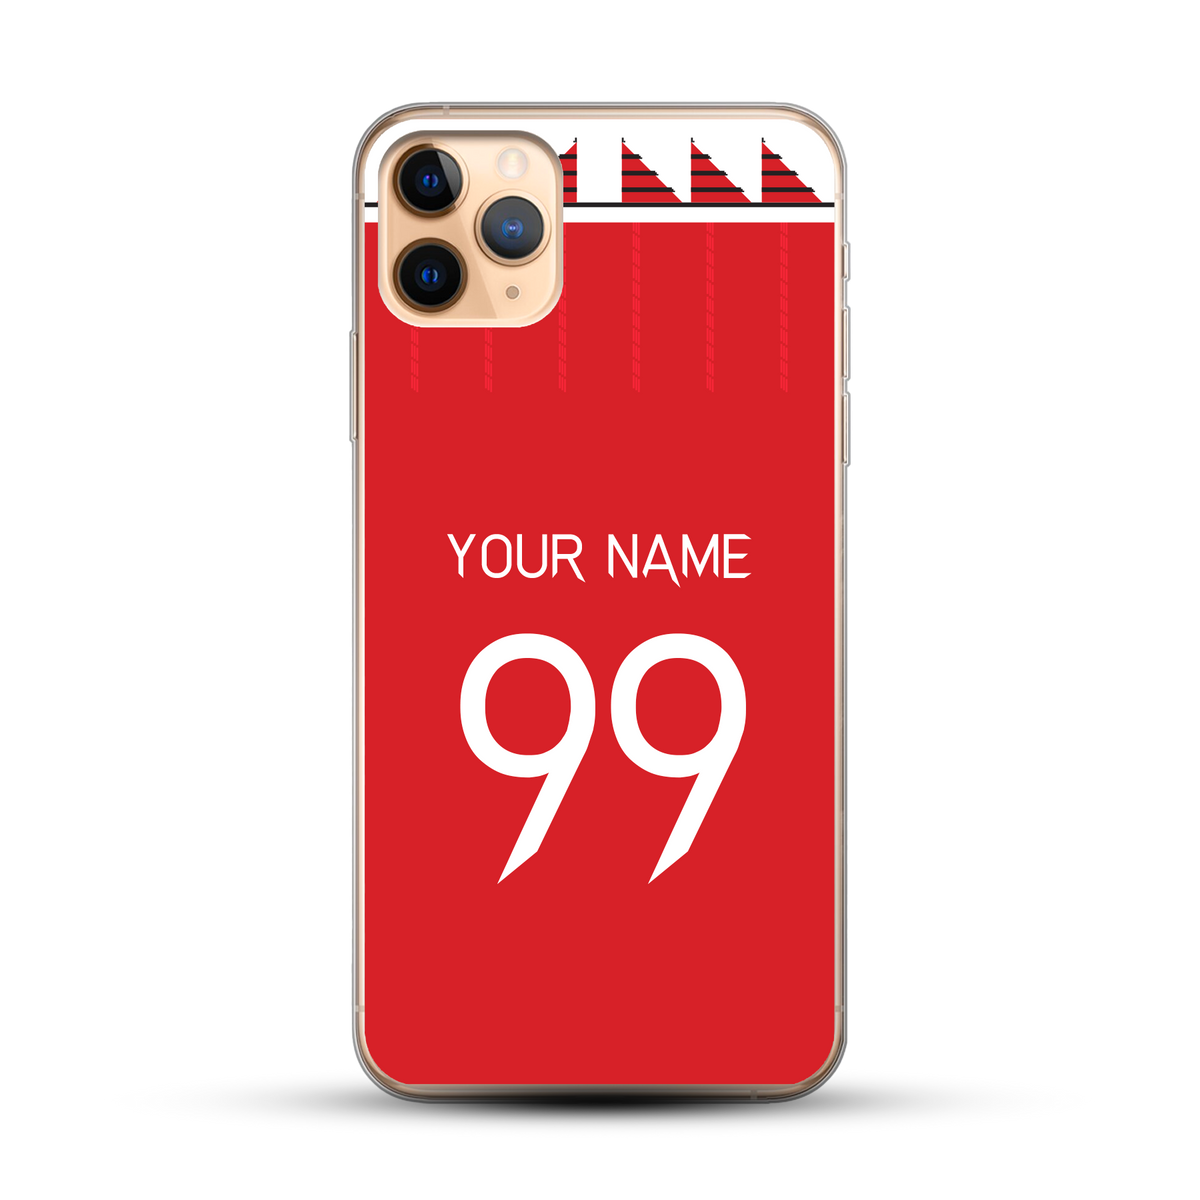 Manchester United (Cup) 2022/23 - Home Kit Phone Case